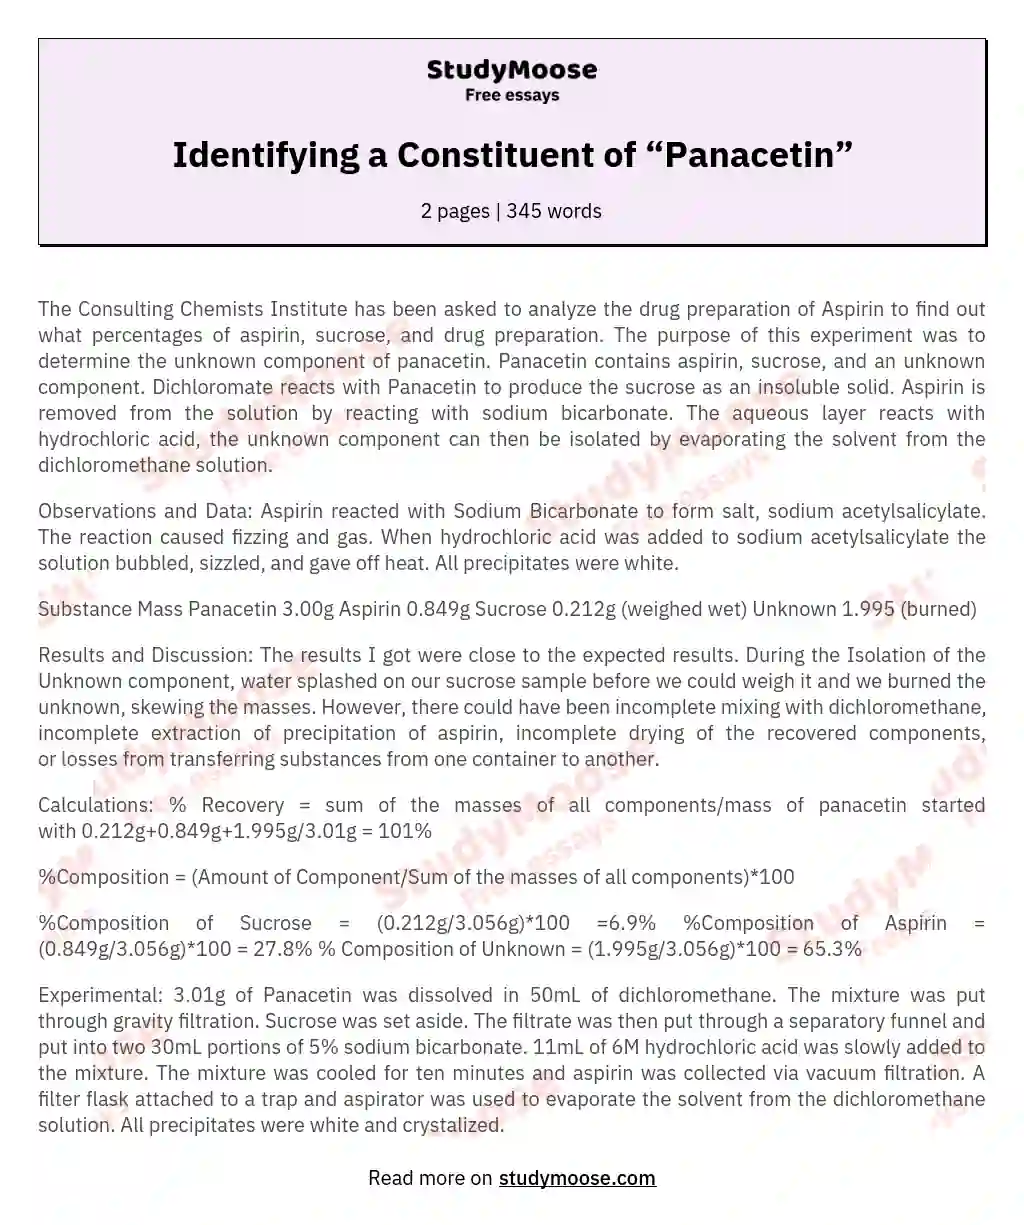 Identifying a Constituent of “Panacetin” essay